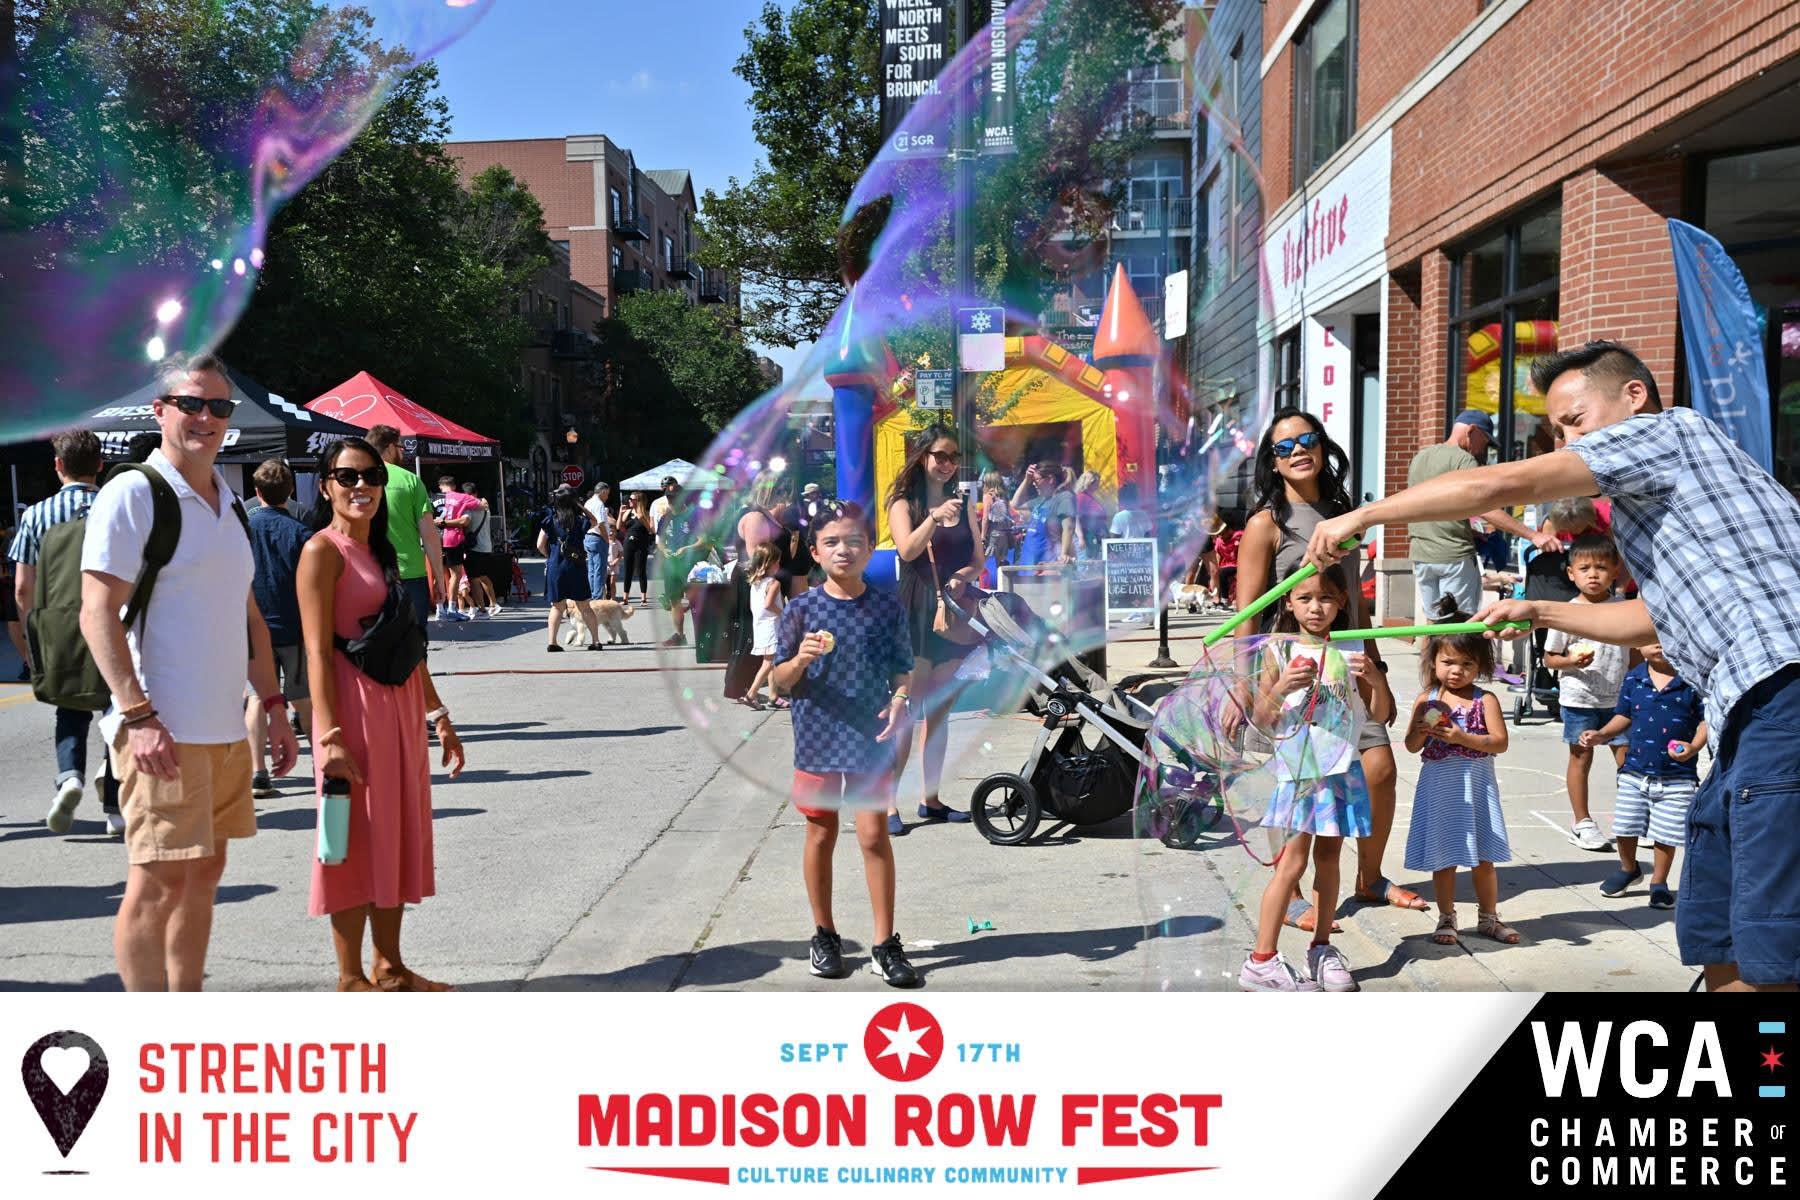 Madison Row Fest - Culture. Culinary. Community. — West Central Association  - Chamber of Commerce